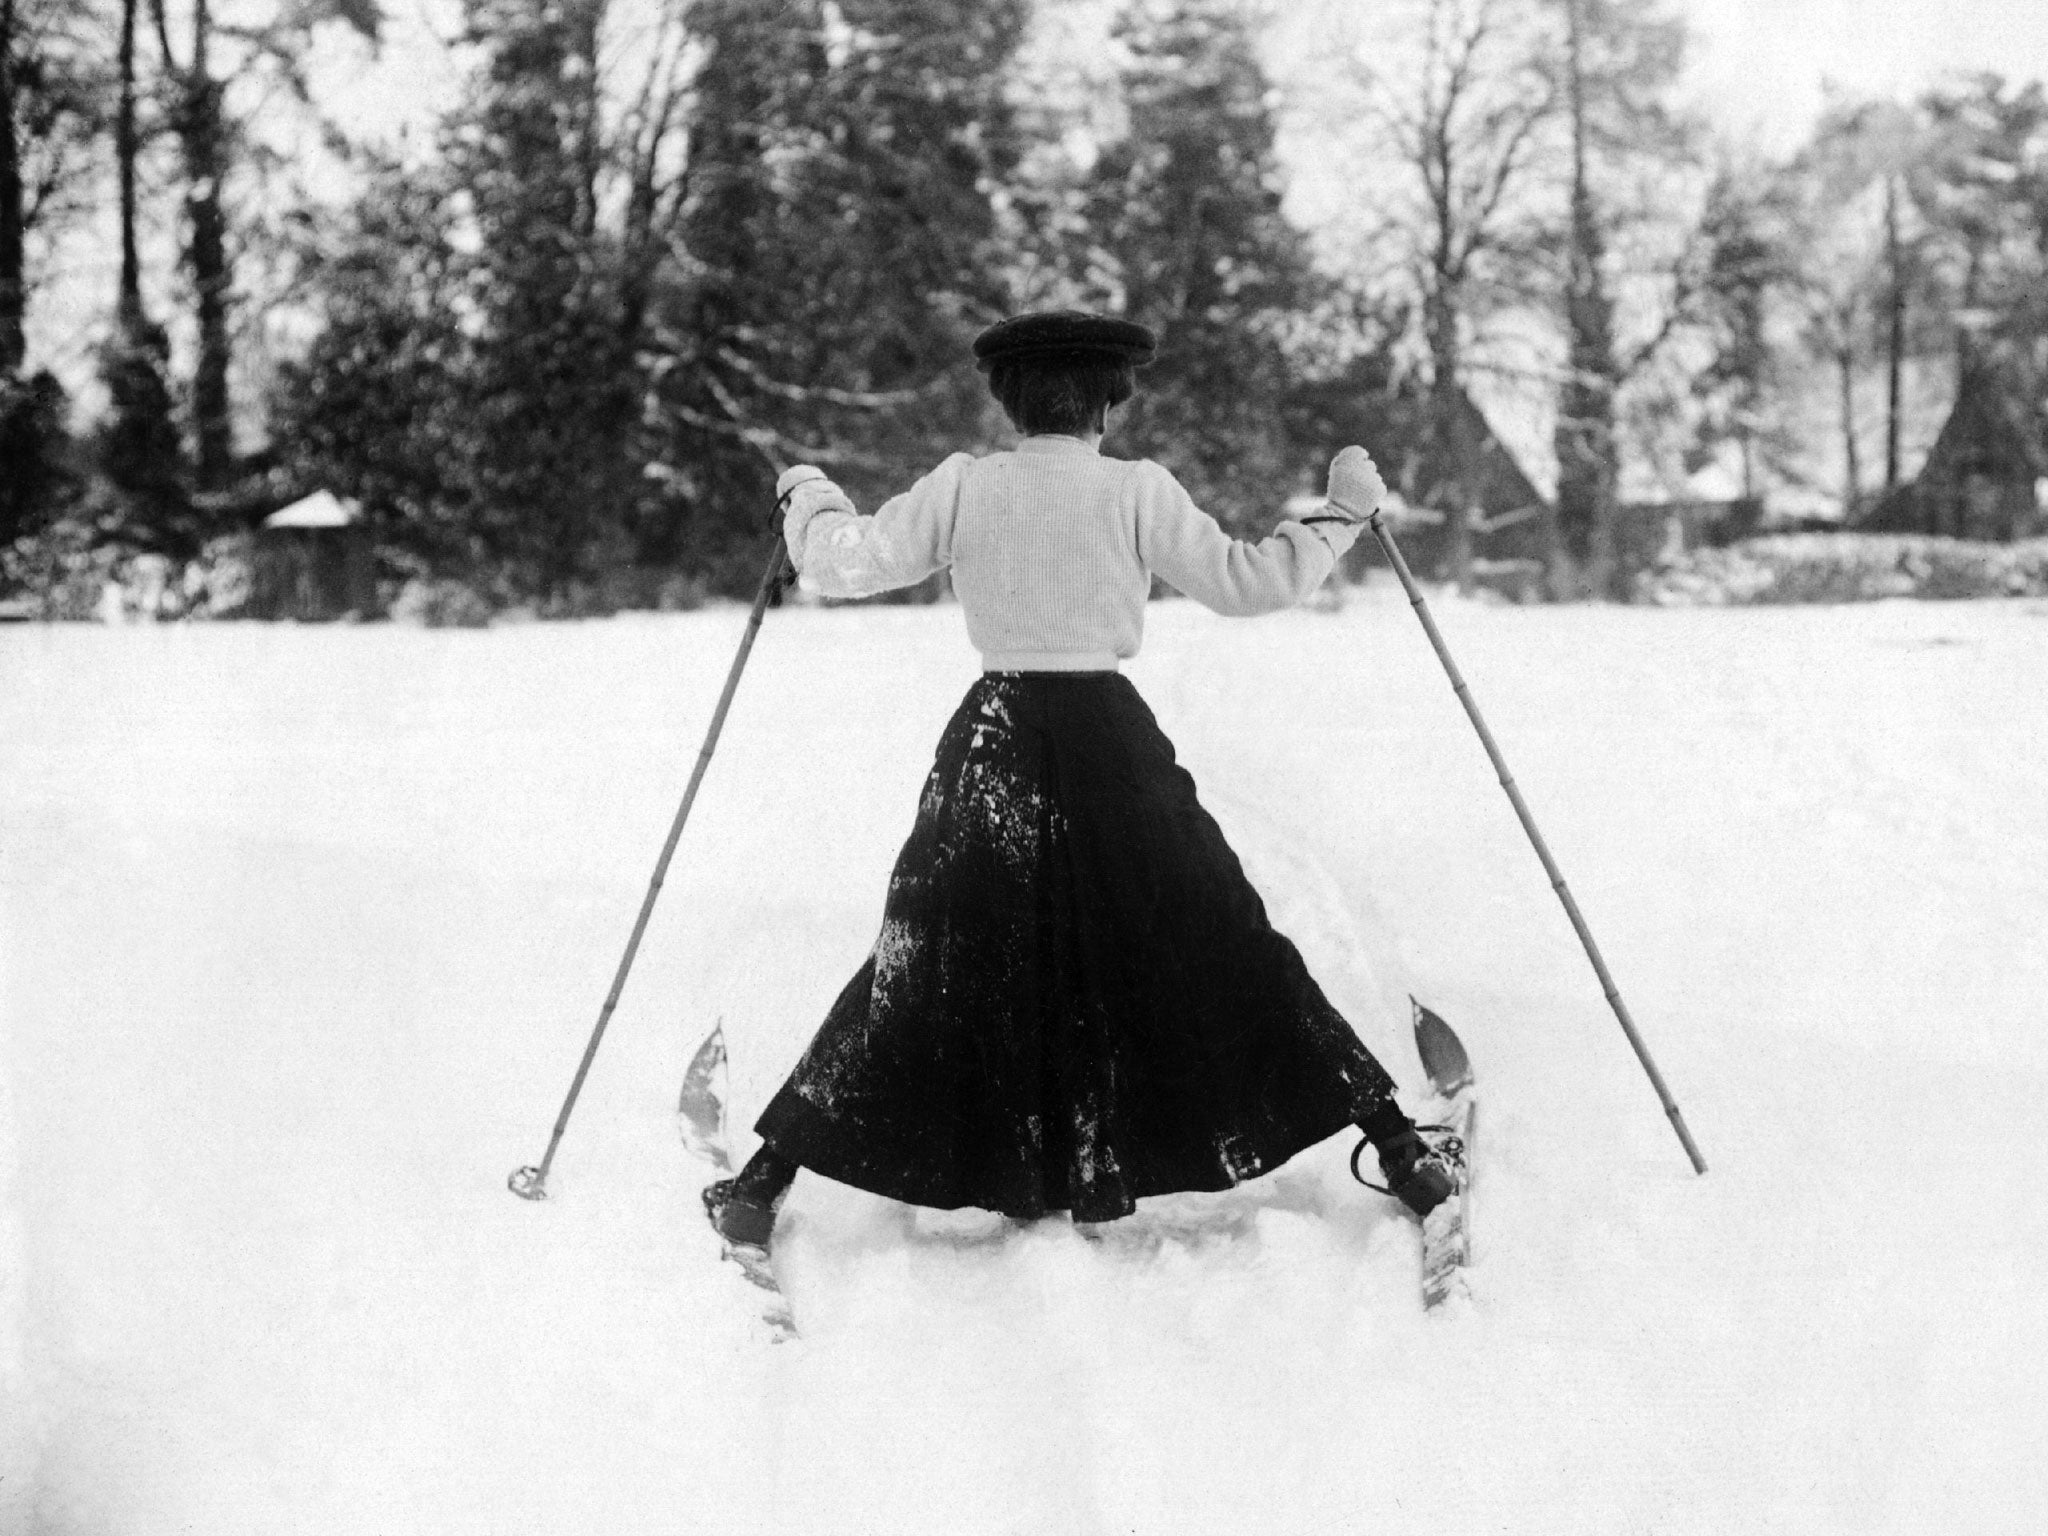 1st December 1908: A woman having a little difficulty controlling her skis in the snow at Northampton.